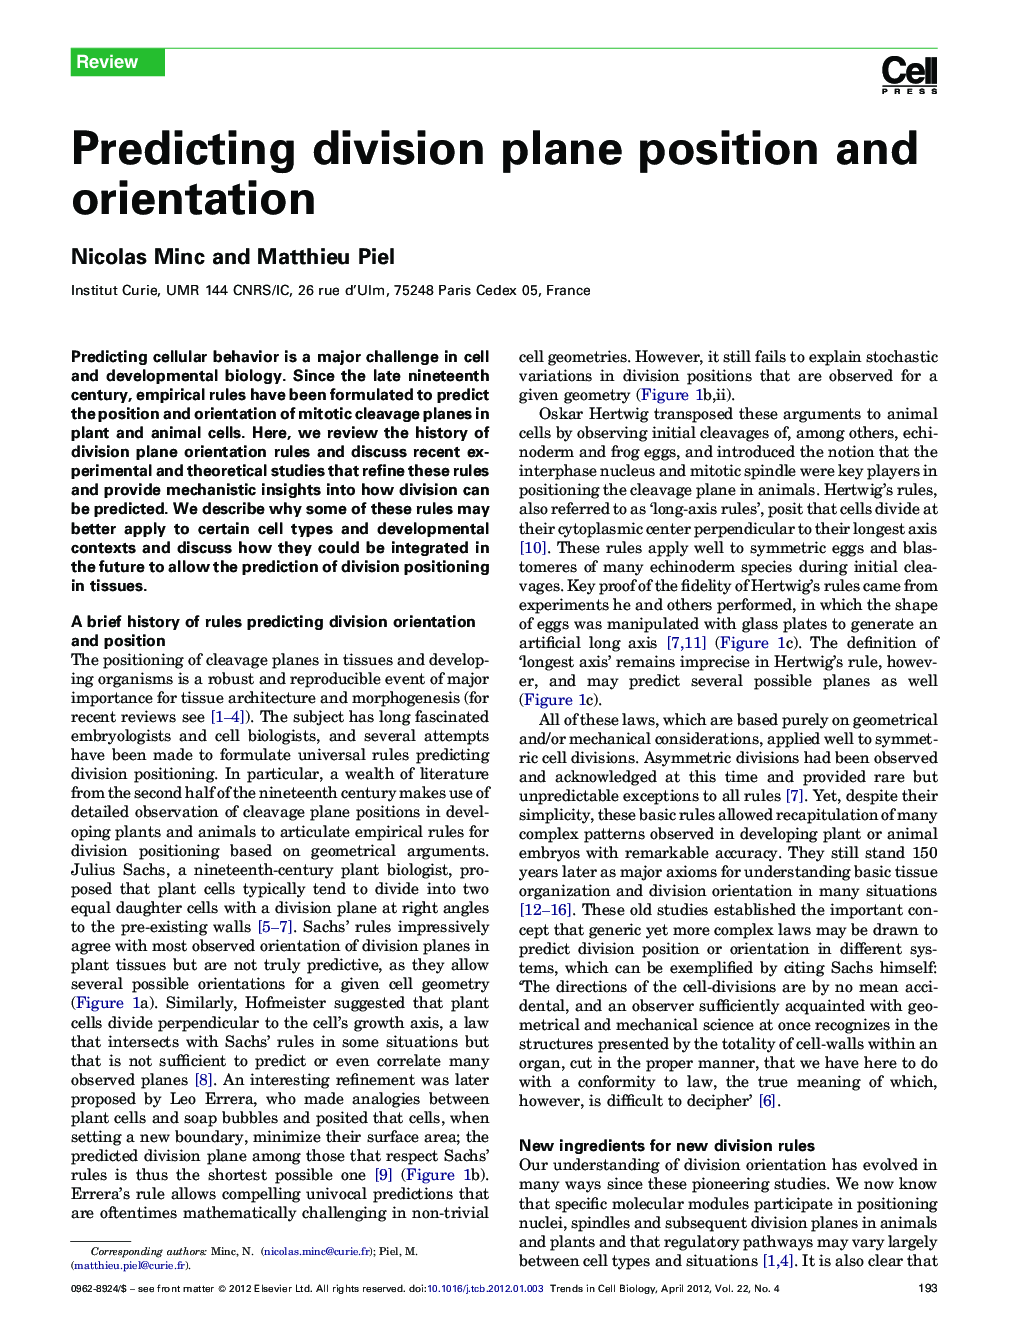 Predicting division plane position and orientation